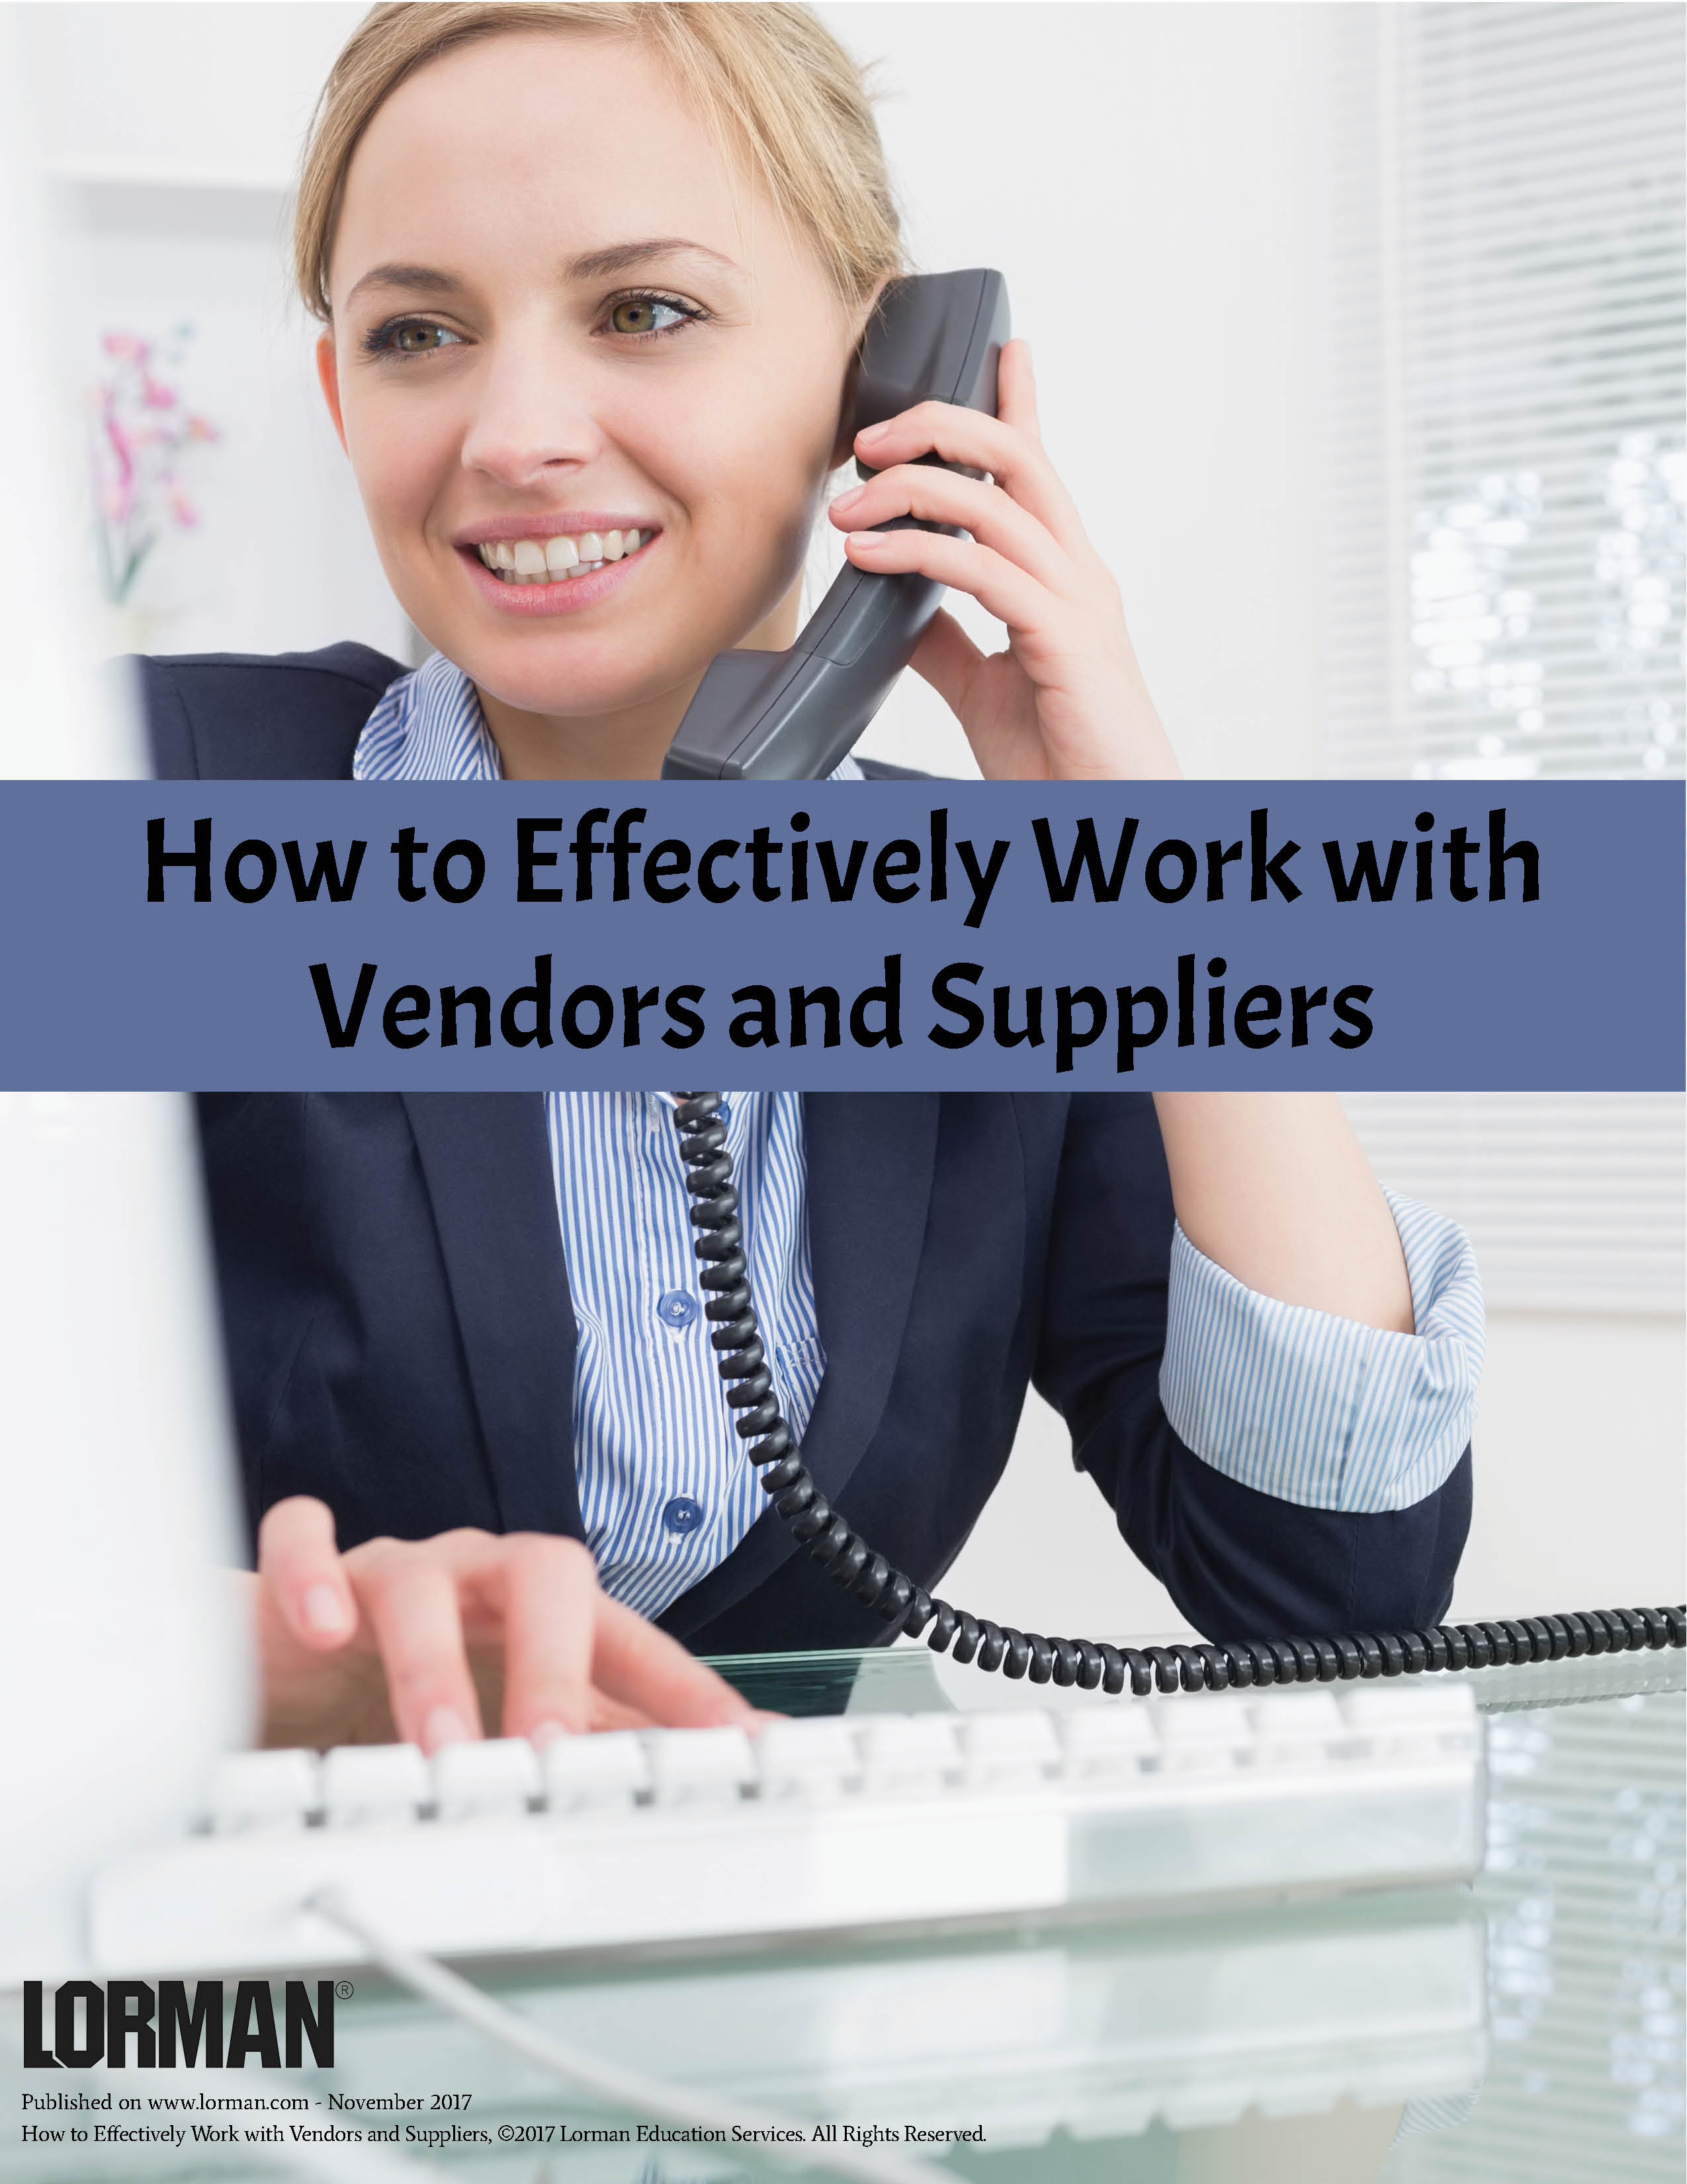 How to Effectively Work with Vendors and Suppliers